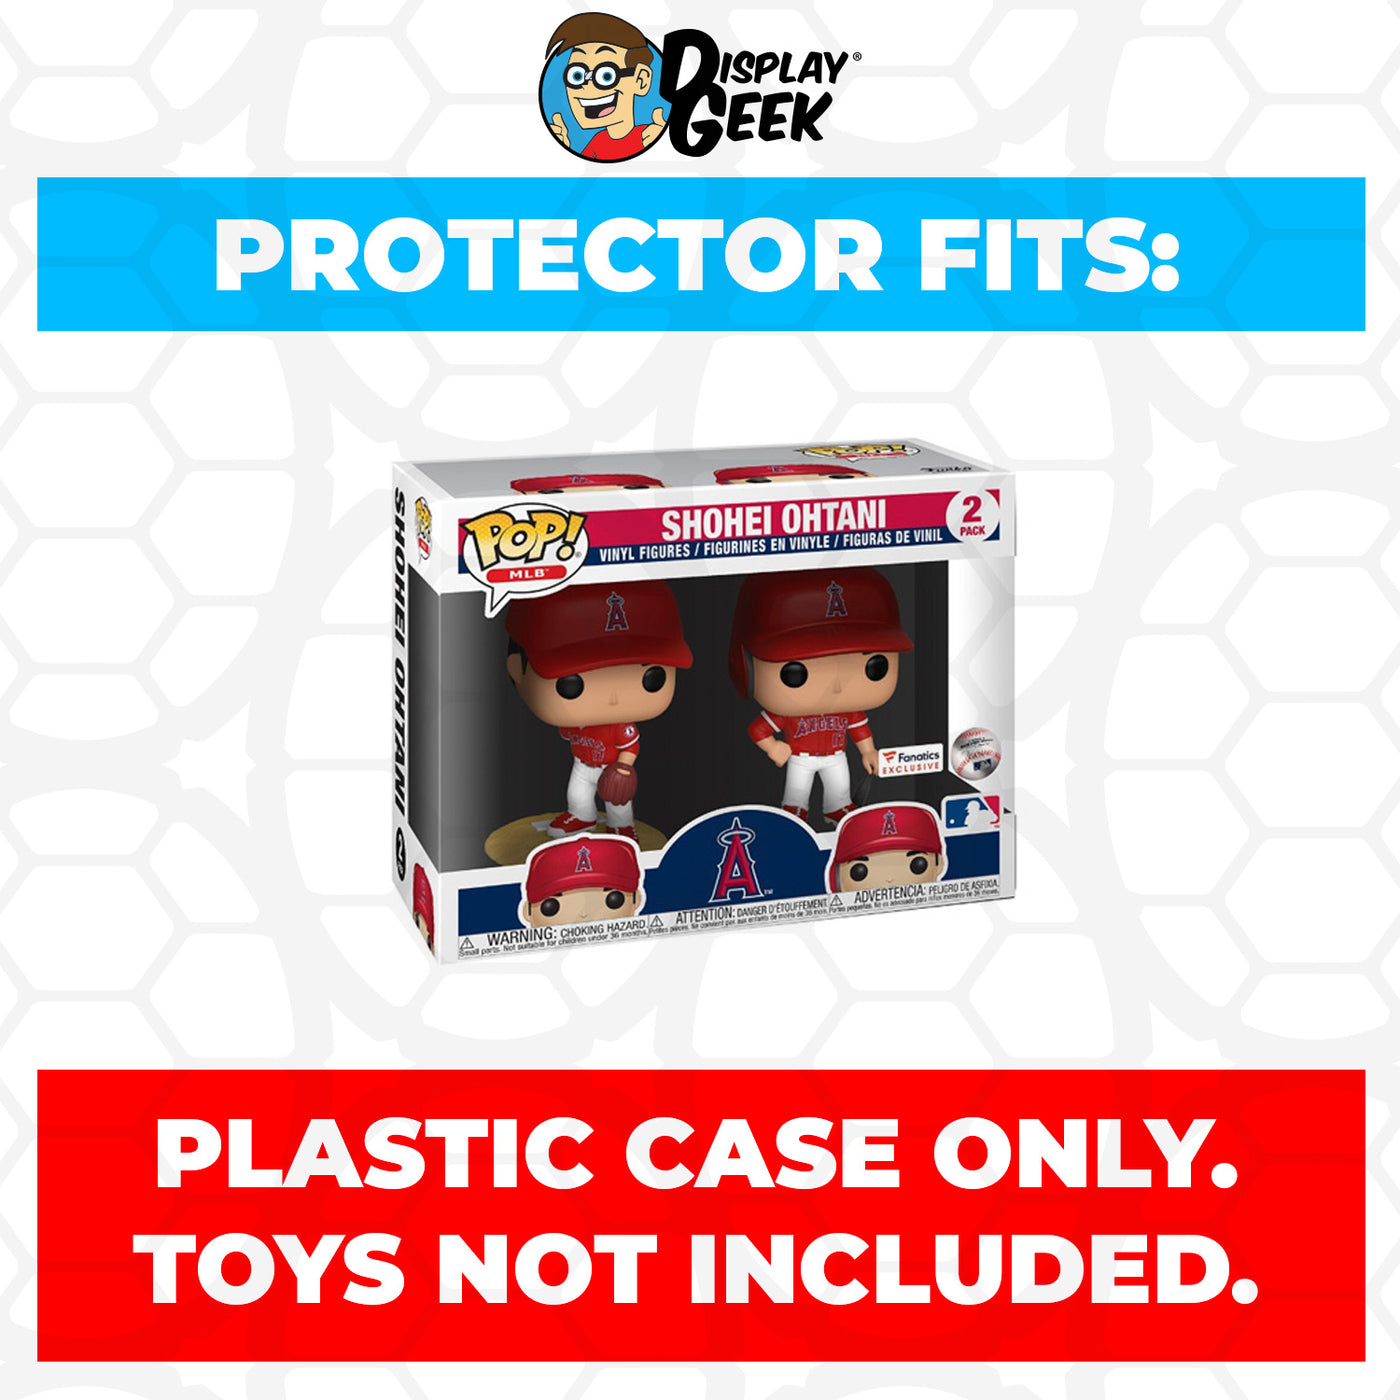 Pop Protector for 2 Pack Shohei Ohtani Alternate Uniform Funko Pop on The Protector Guide App by Display Geek